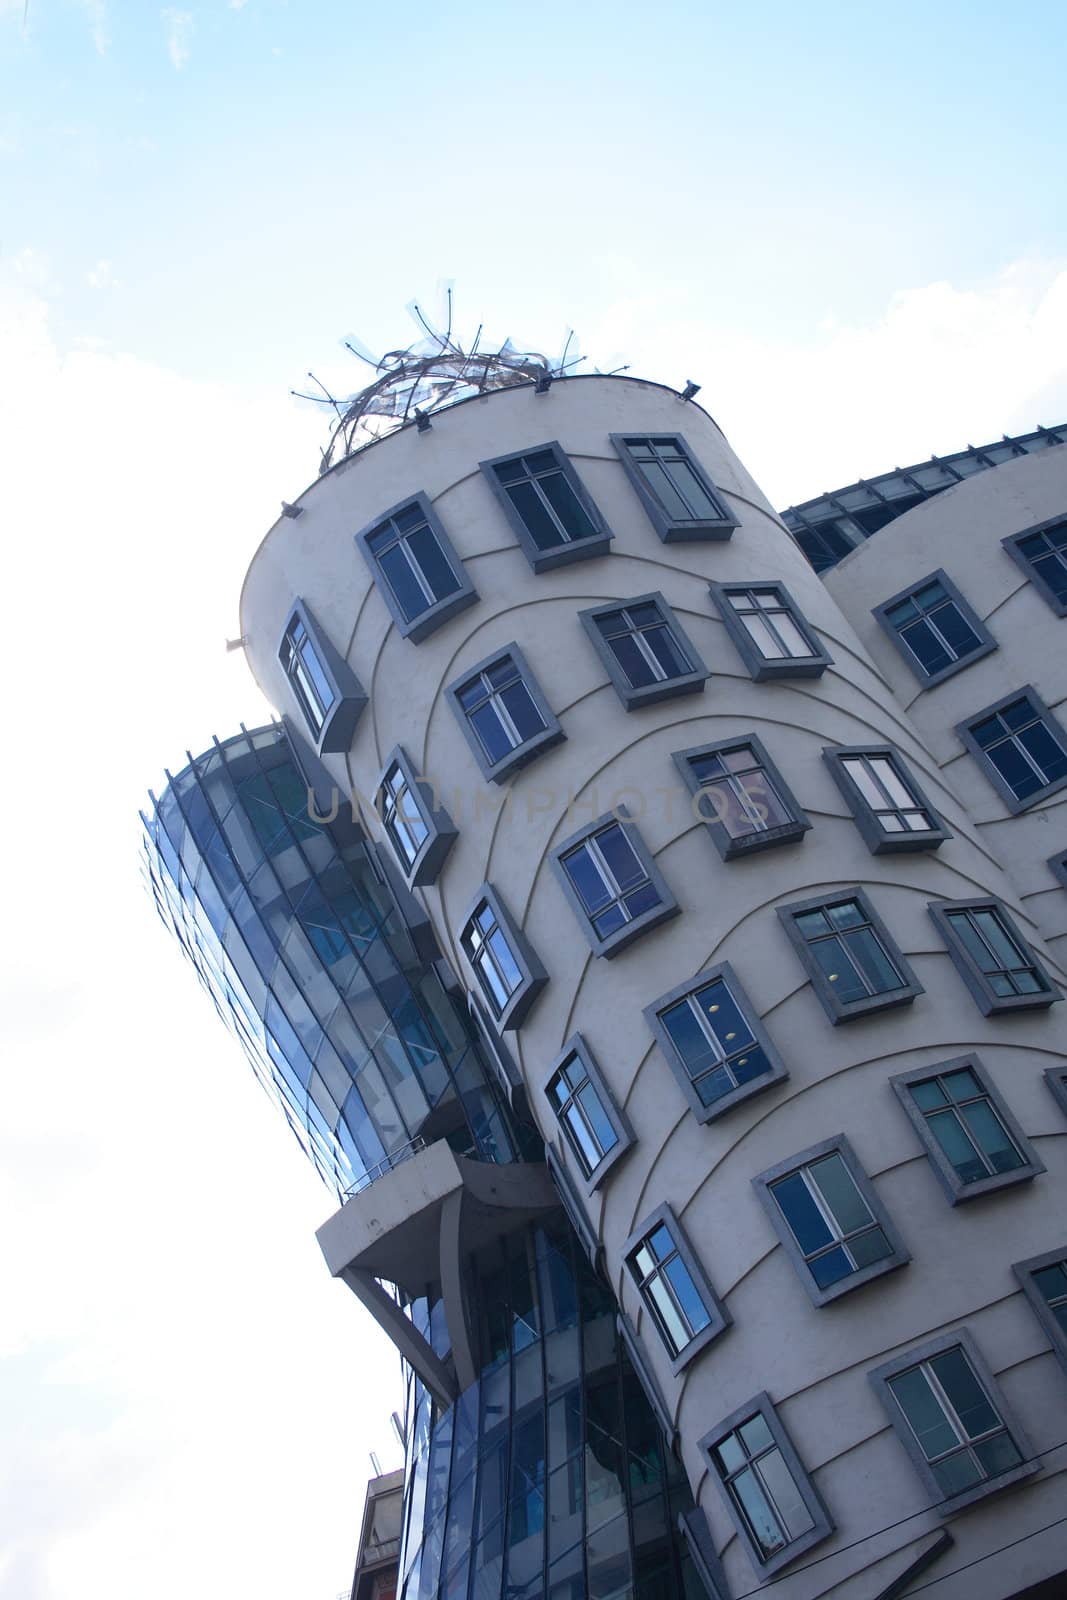 dancing house - modern architecture from the Prague 